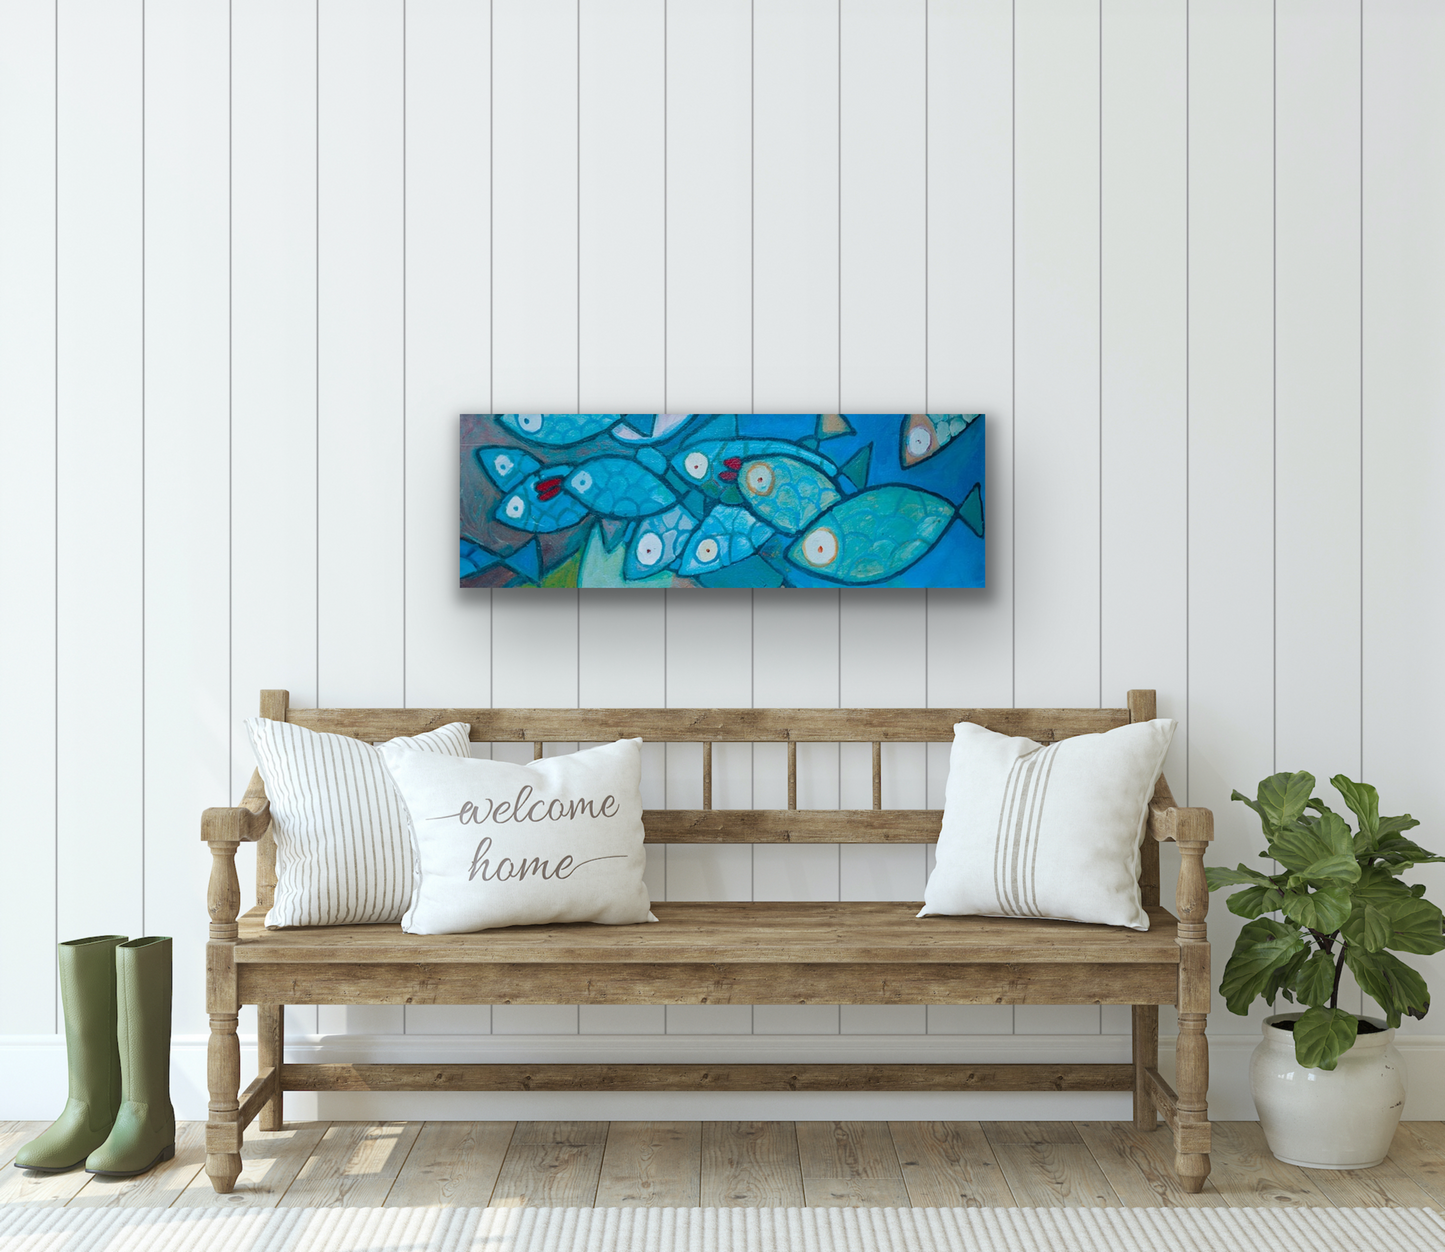 Ten Little Fishes art work will look great in your entrance way.